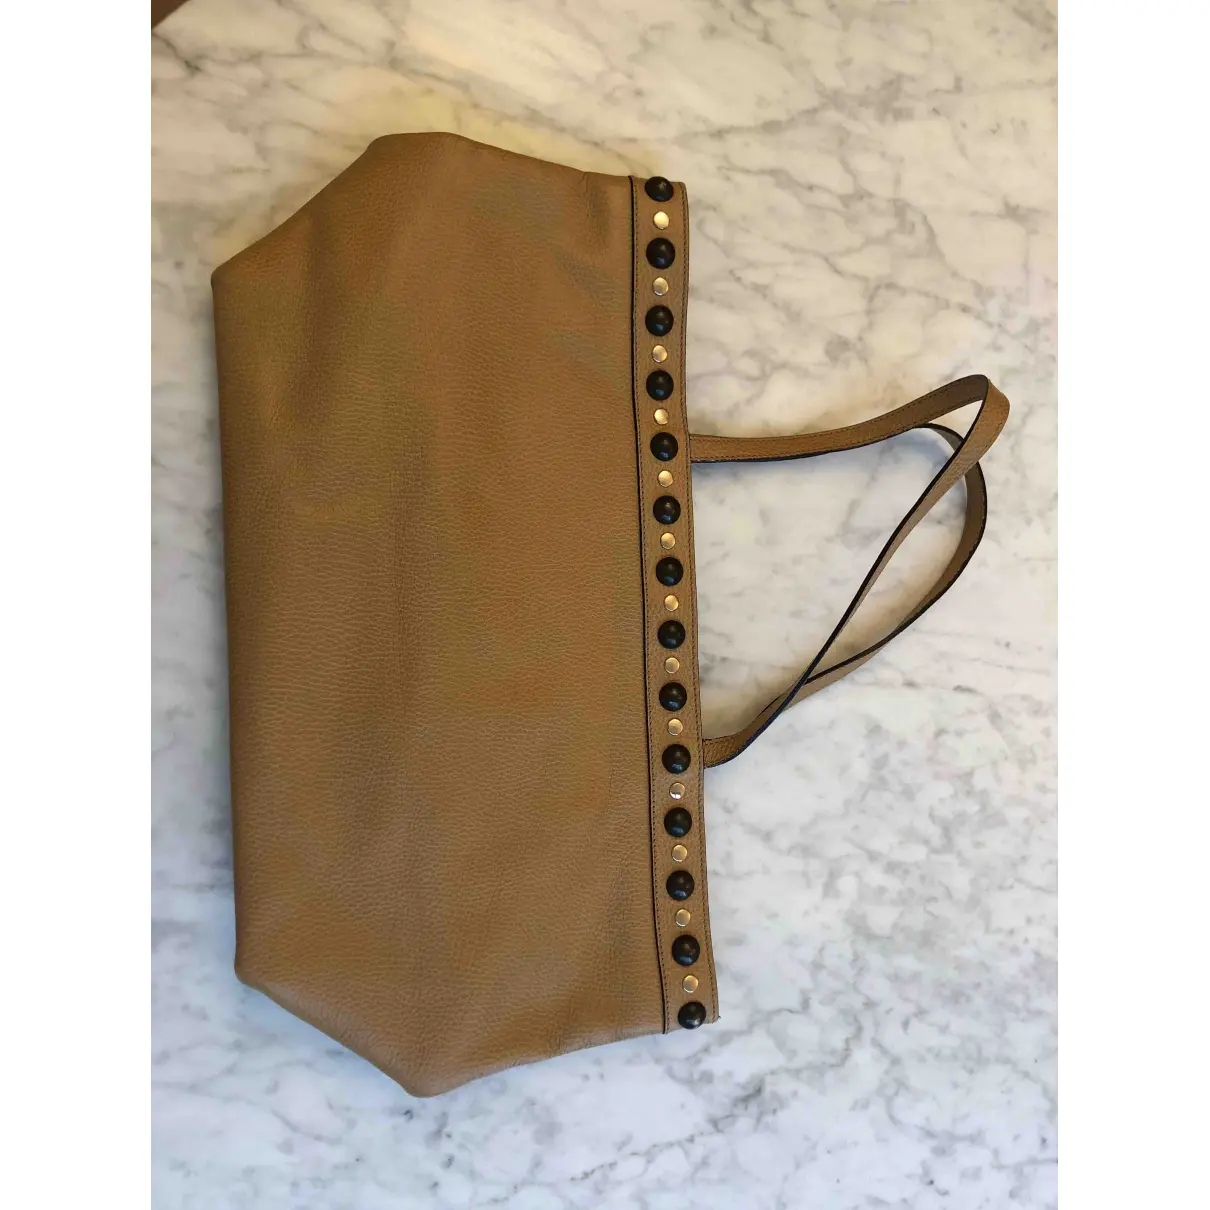 Buy Gucci Leather tote online